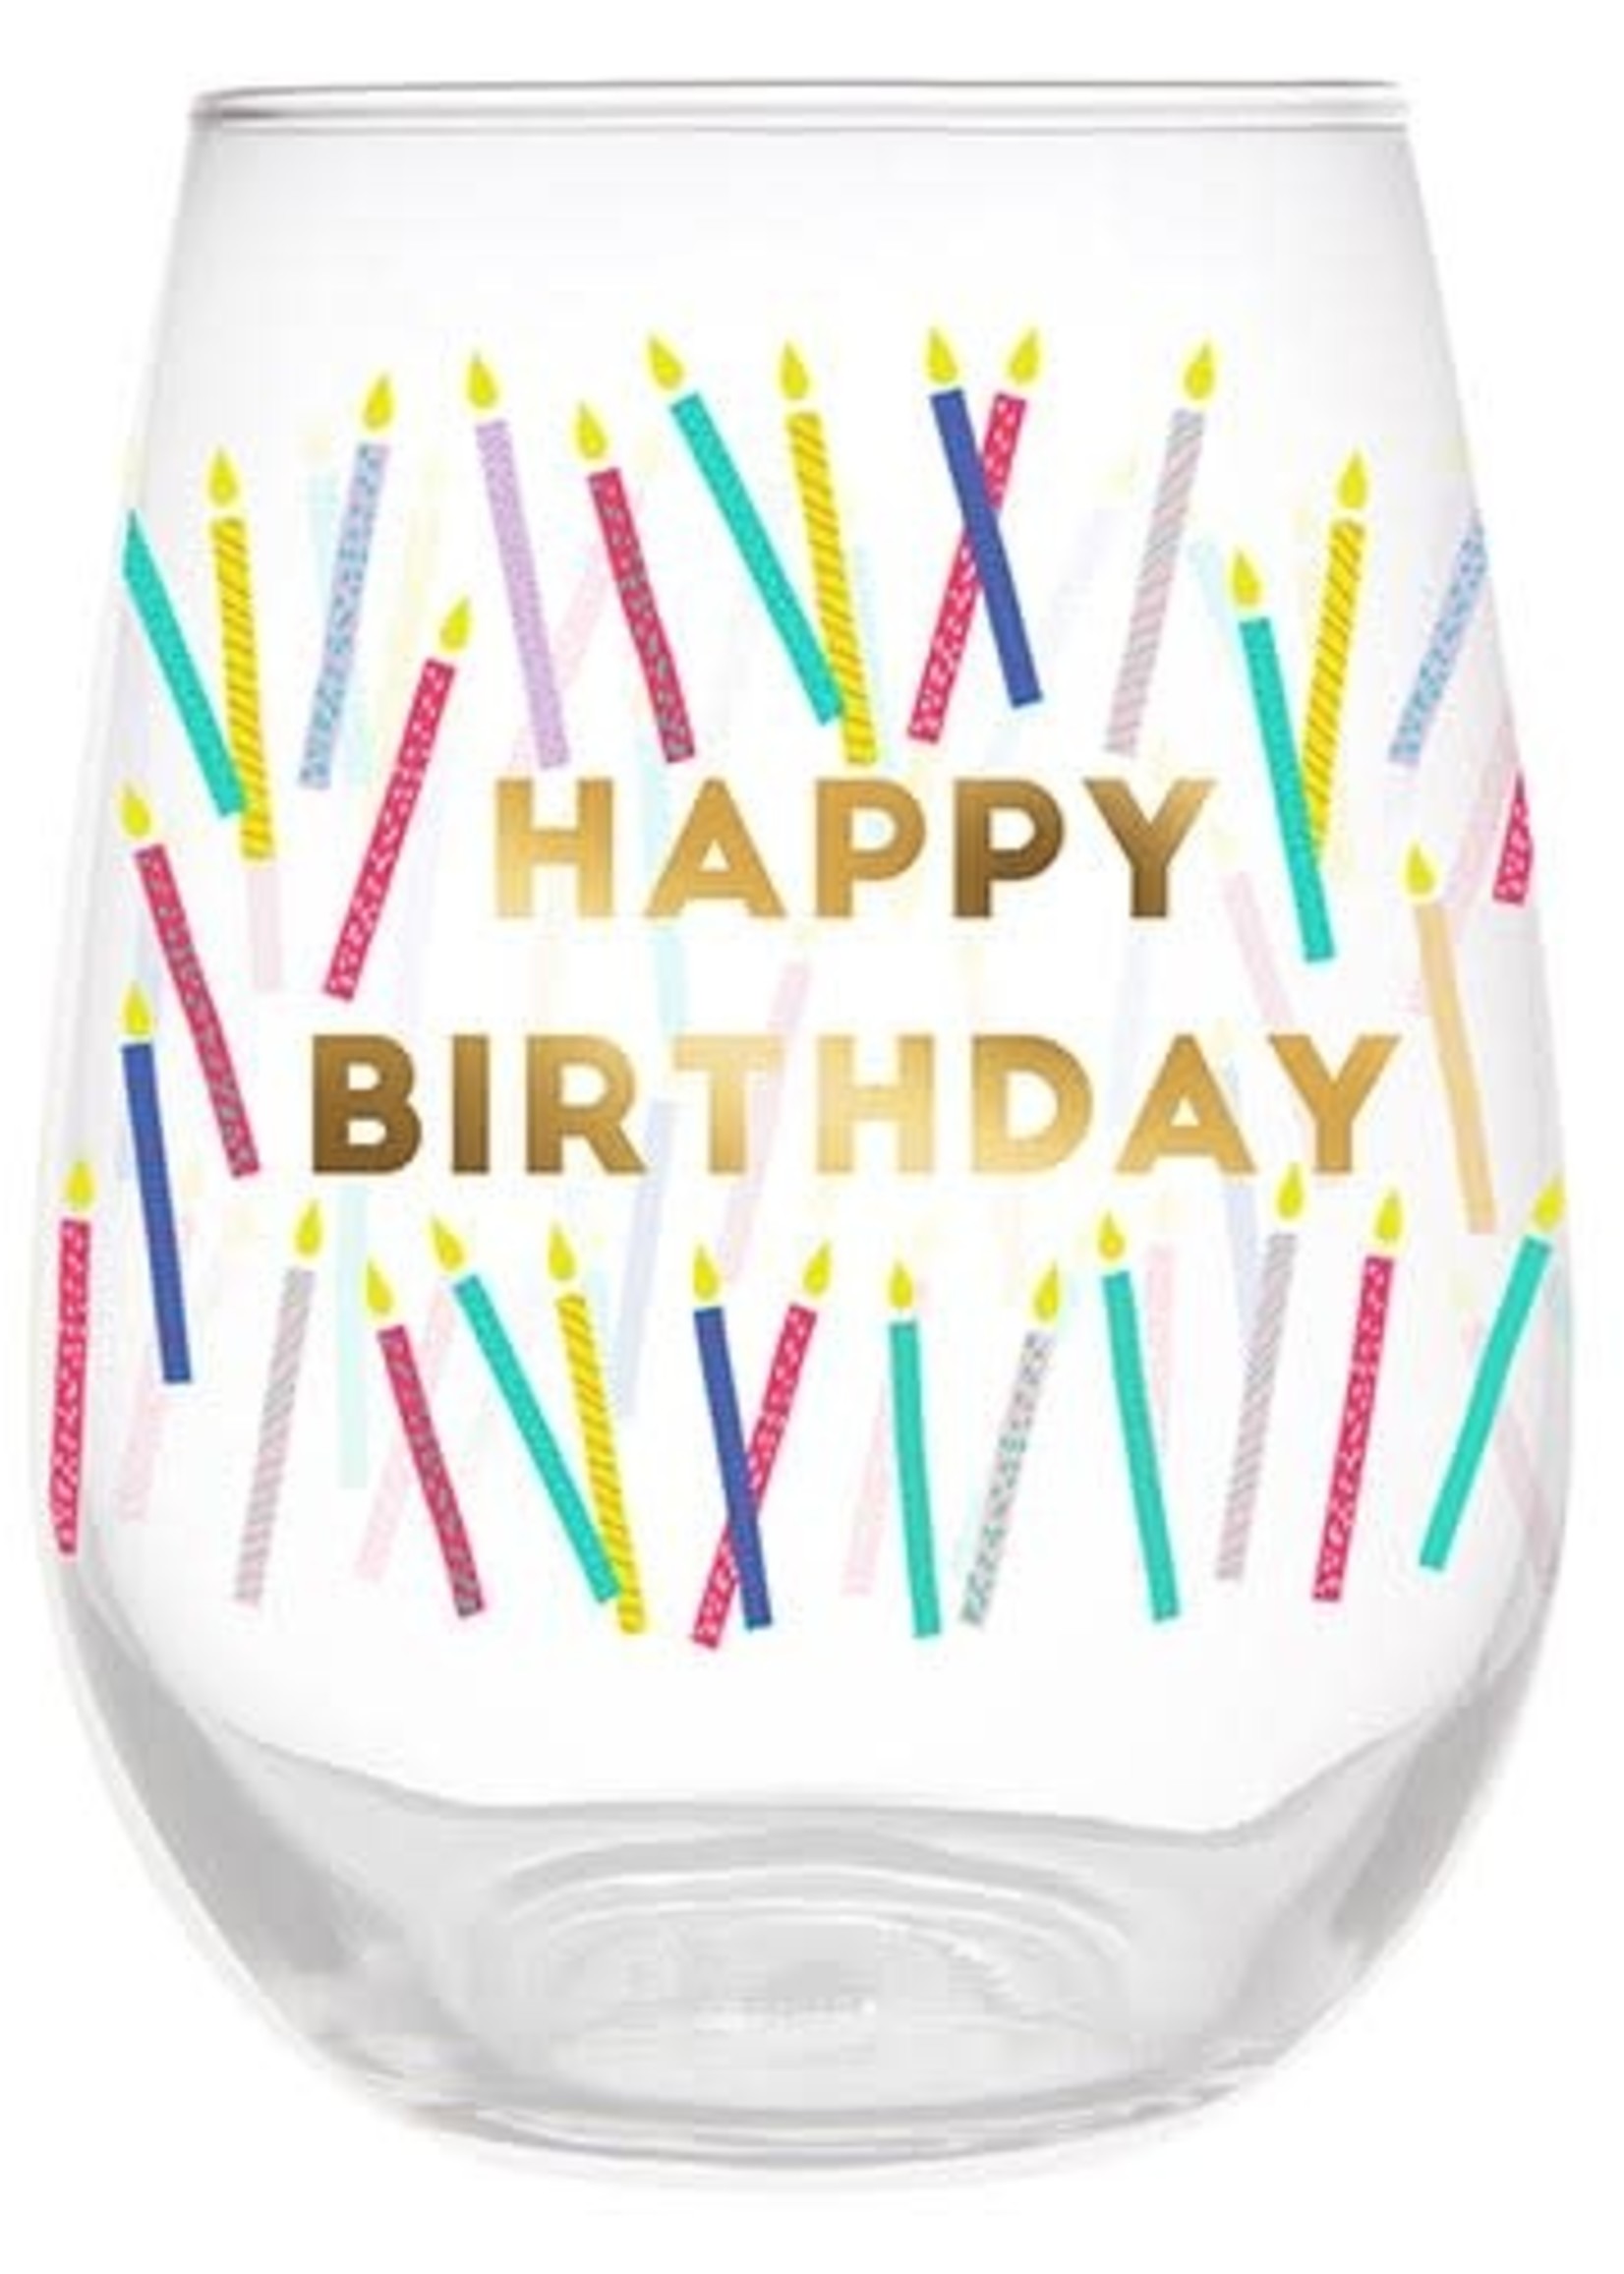 Slant Collections Wine Glass - Happy Birthday Candles